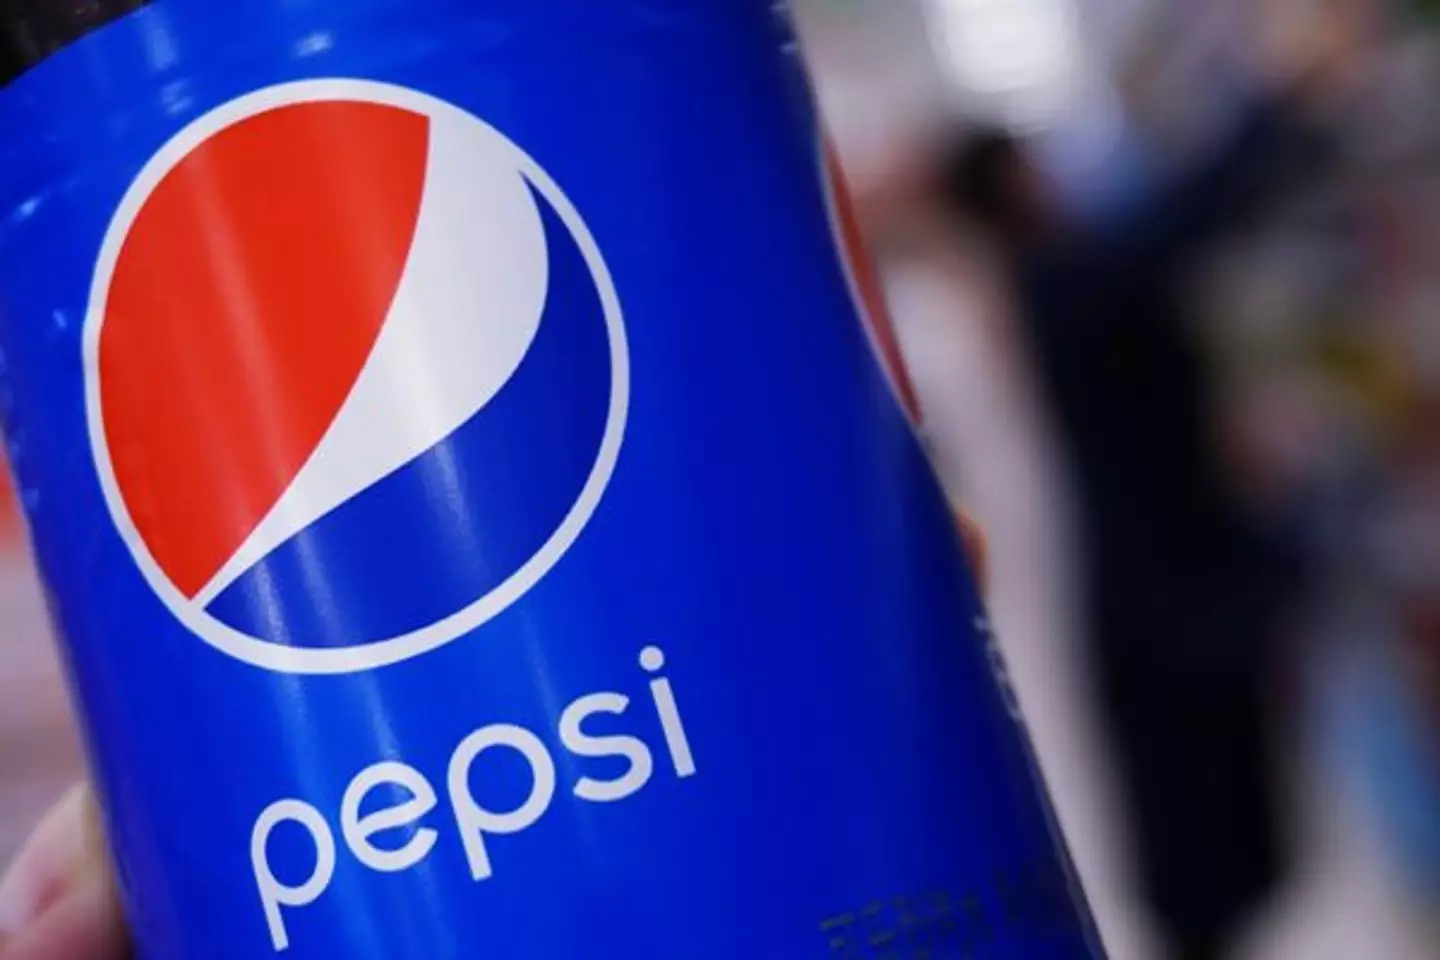 Pepsi drinkers couldn't believe the rebrand. (Long Wei/VCG via Getty Images)